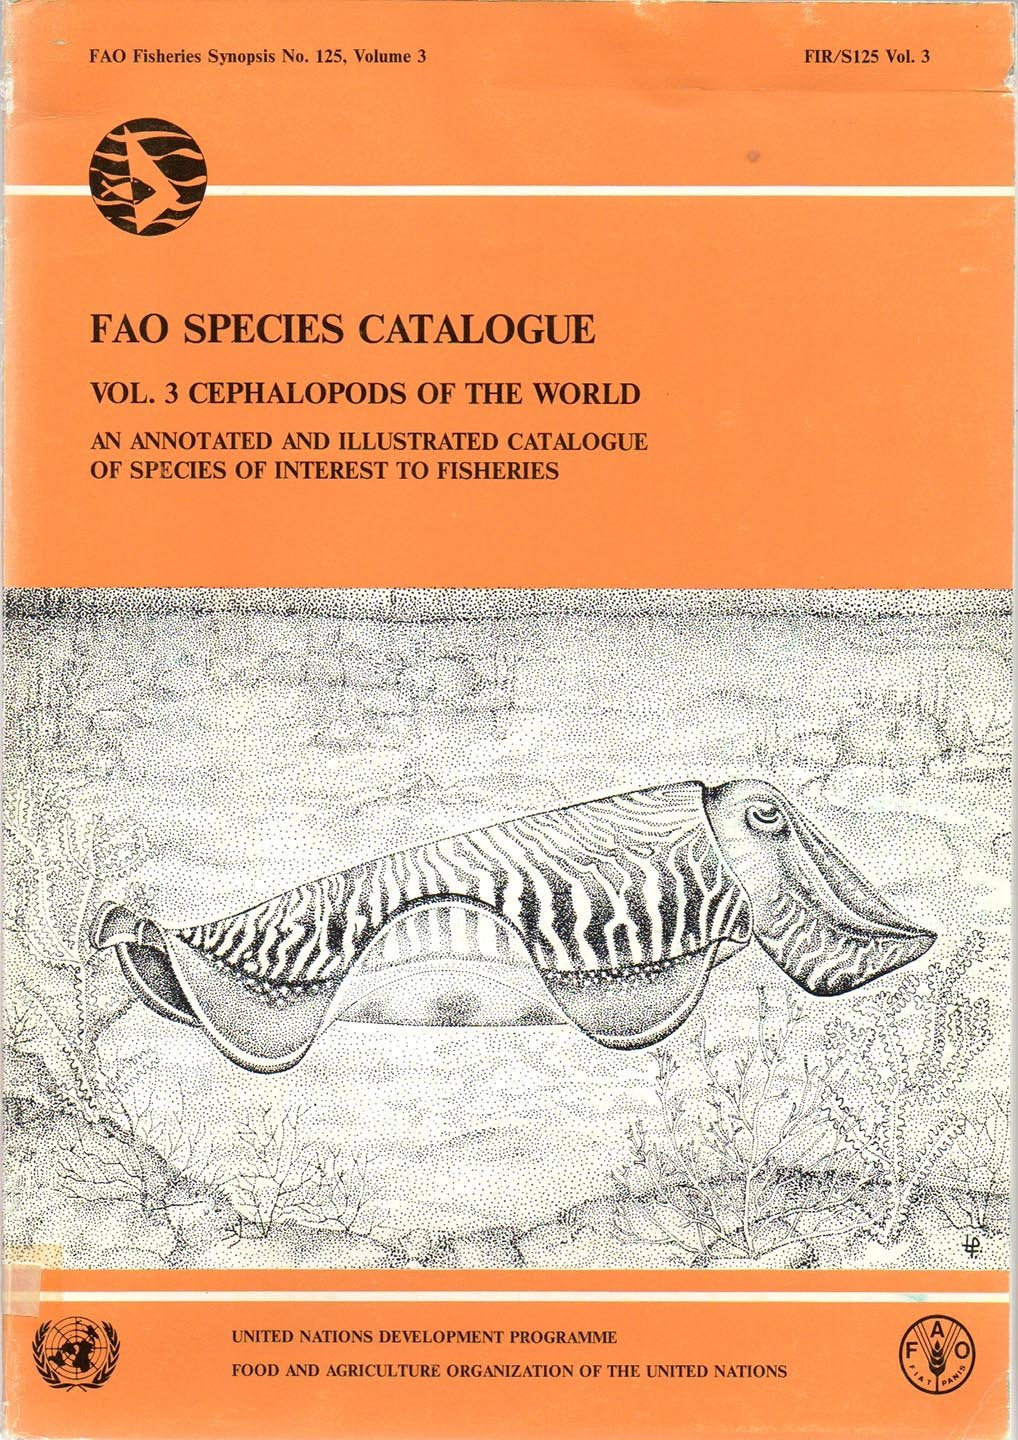 Cephalopods of the World: an Annotated and Illustrated Catalogue of Species of Interest to Fisheries (FAO Species Catalogue Vol. 3)